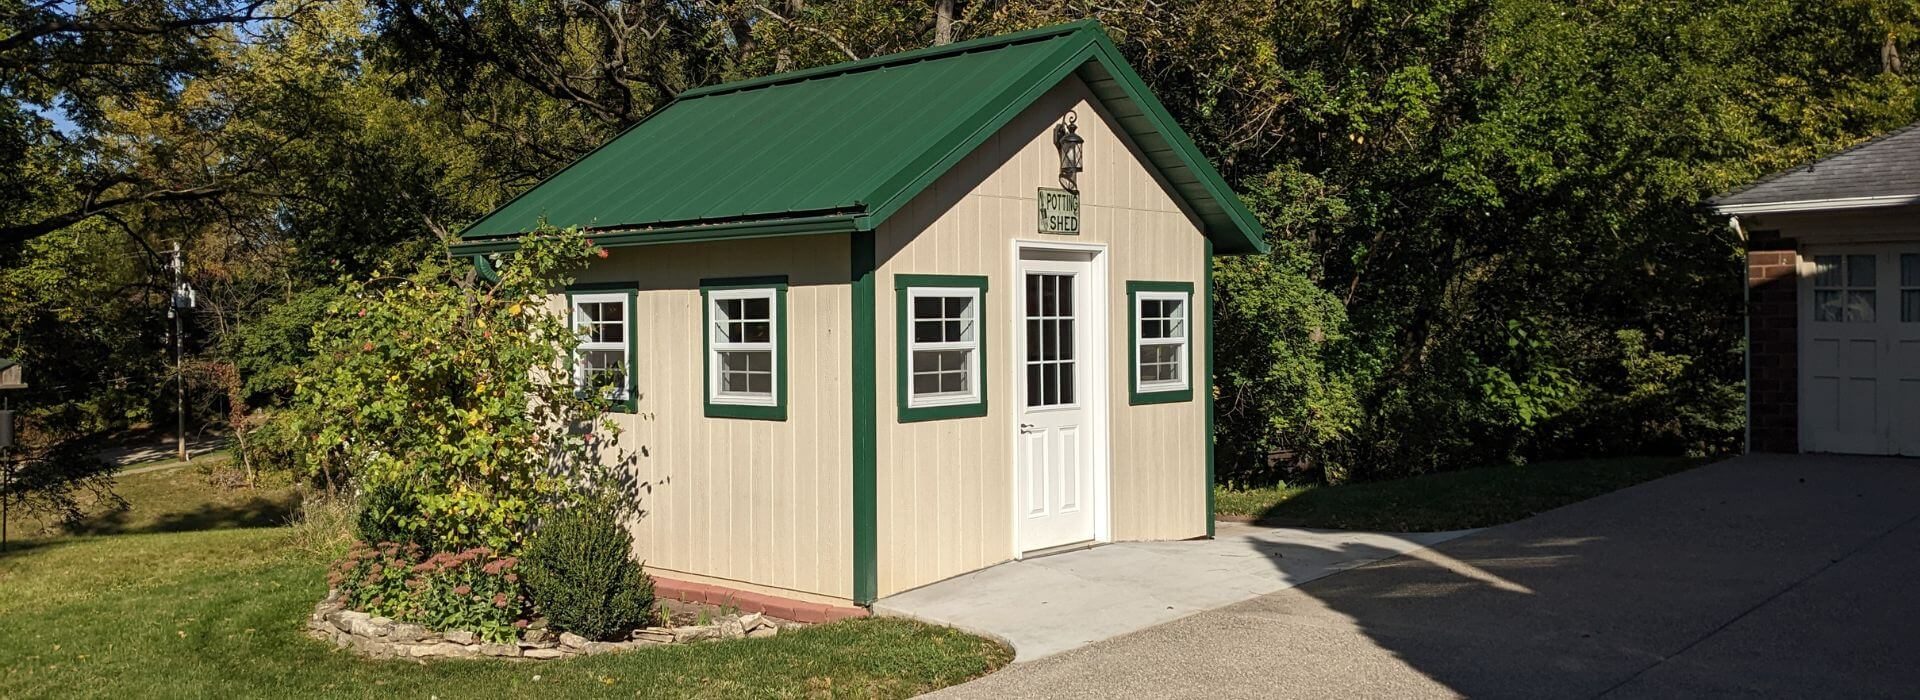 tan shed with green roof and trim, and a white door, with green trees in the background and a sidewalk and green grass.